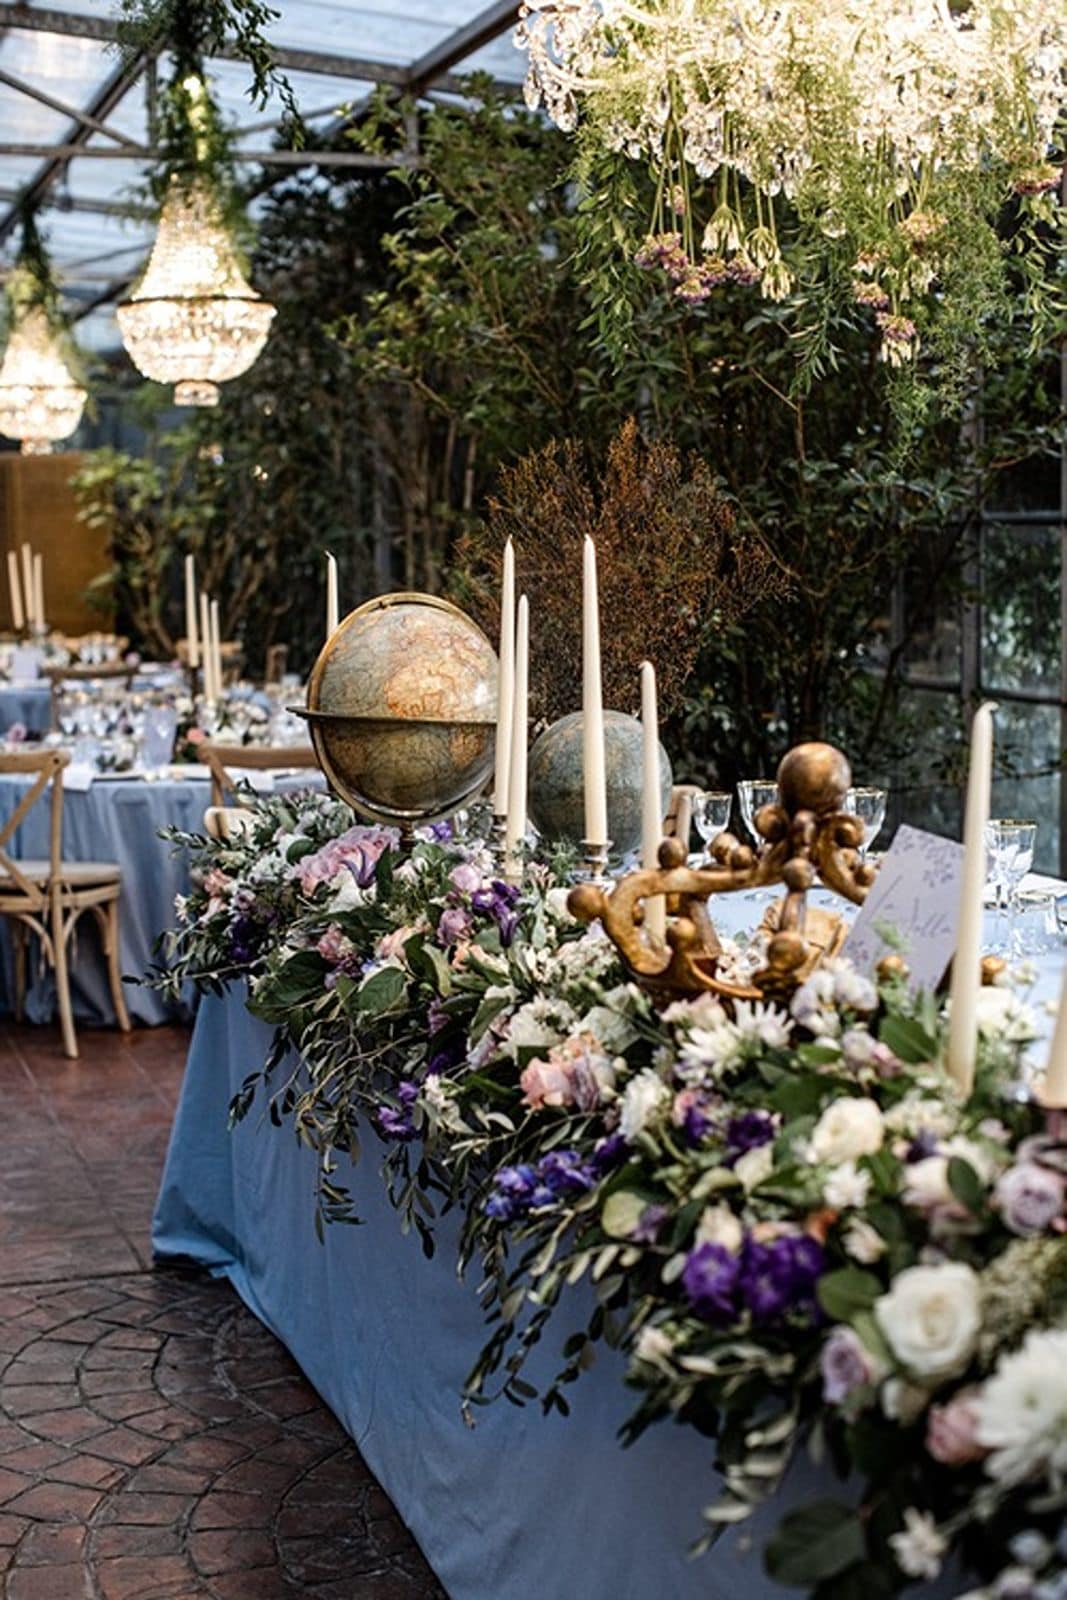 Banquet reception table with lavender tablecloth and full garden-inspired florals for centerpieces